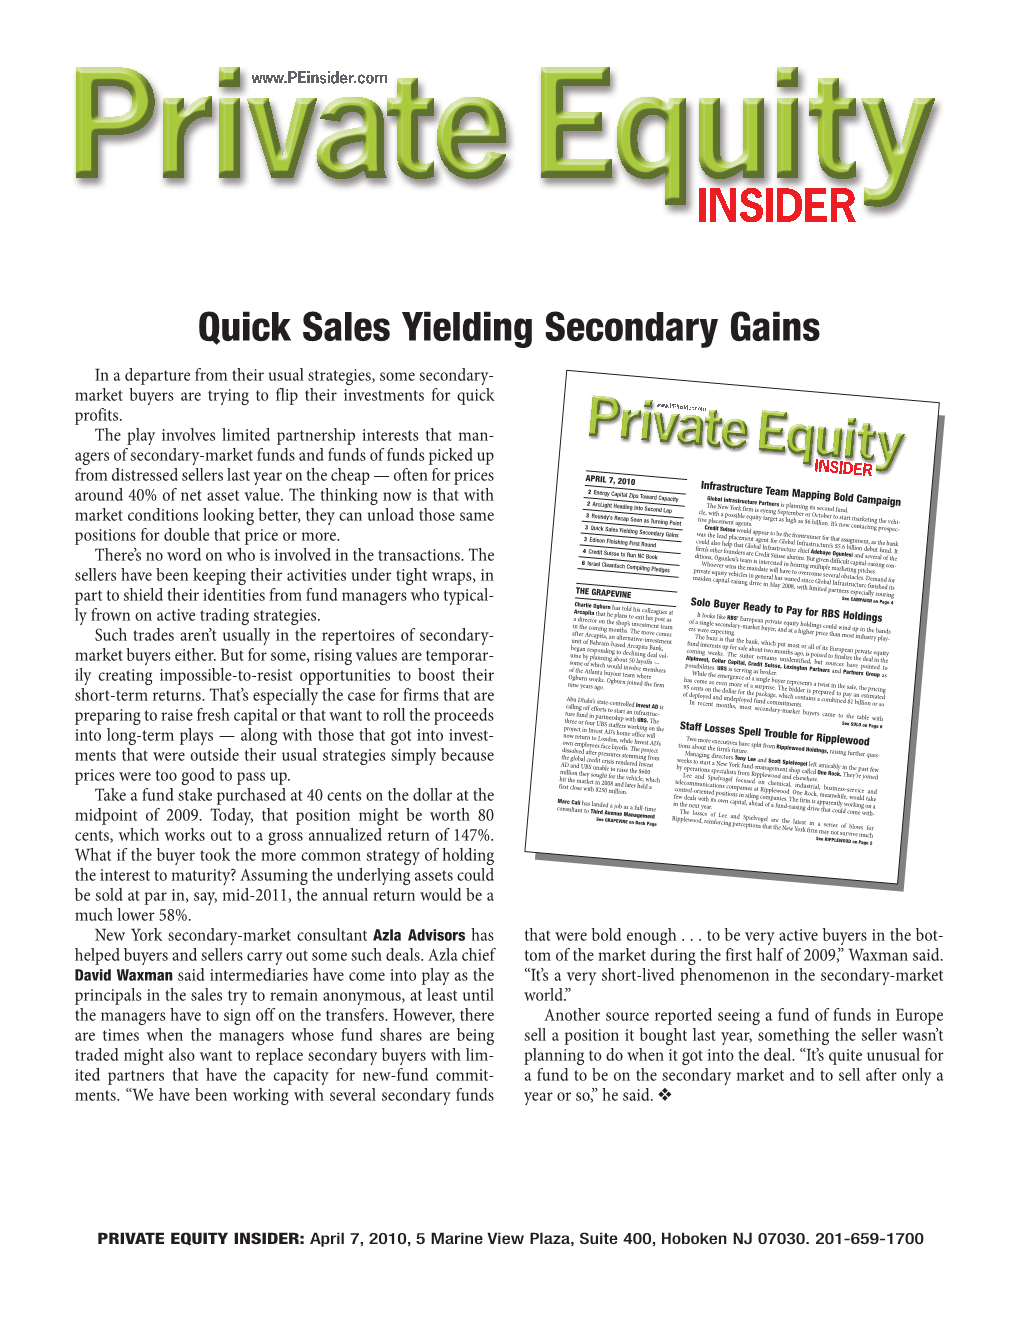 PRIVATE EQUITY INSIDER: April 7, 2010, 5 Marine View Plaza, Suite 400, Hoboken NJ 07030